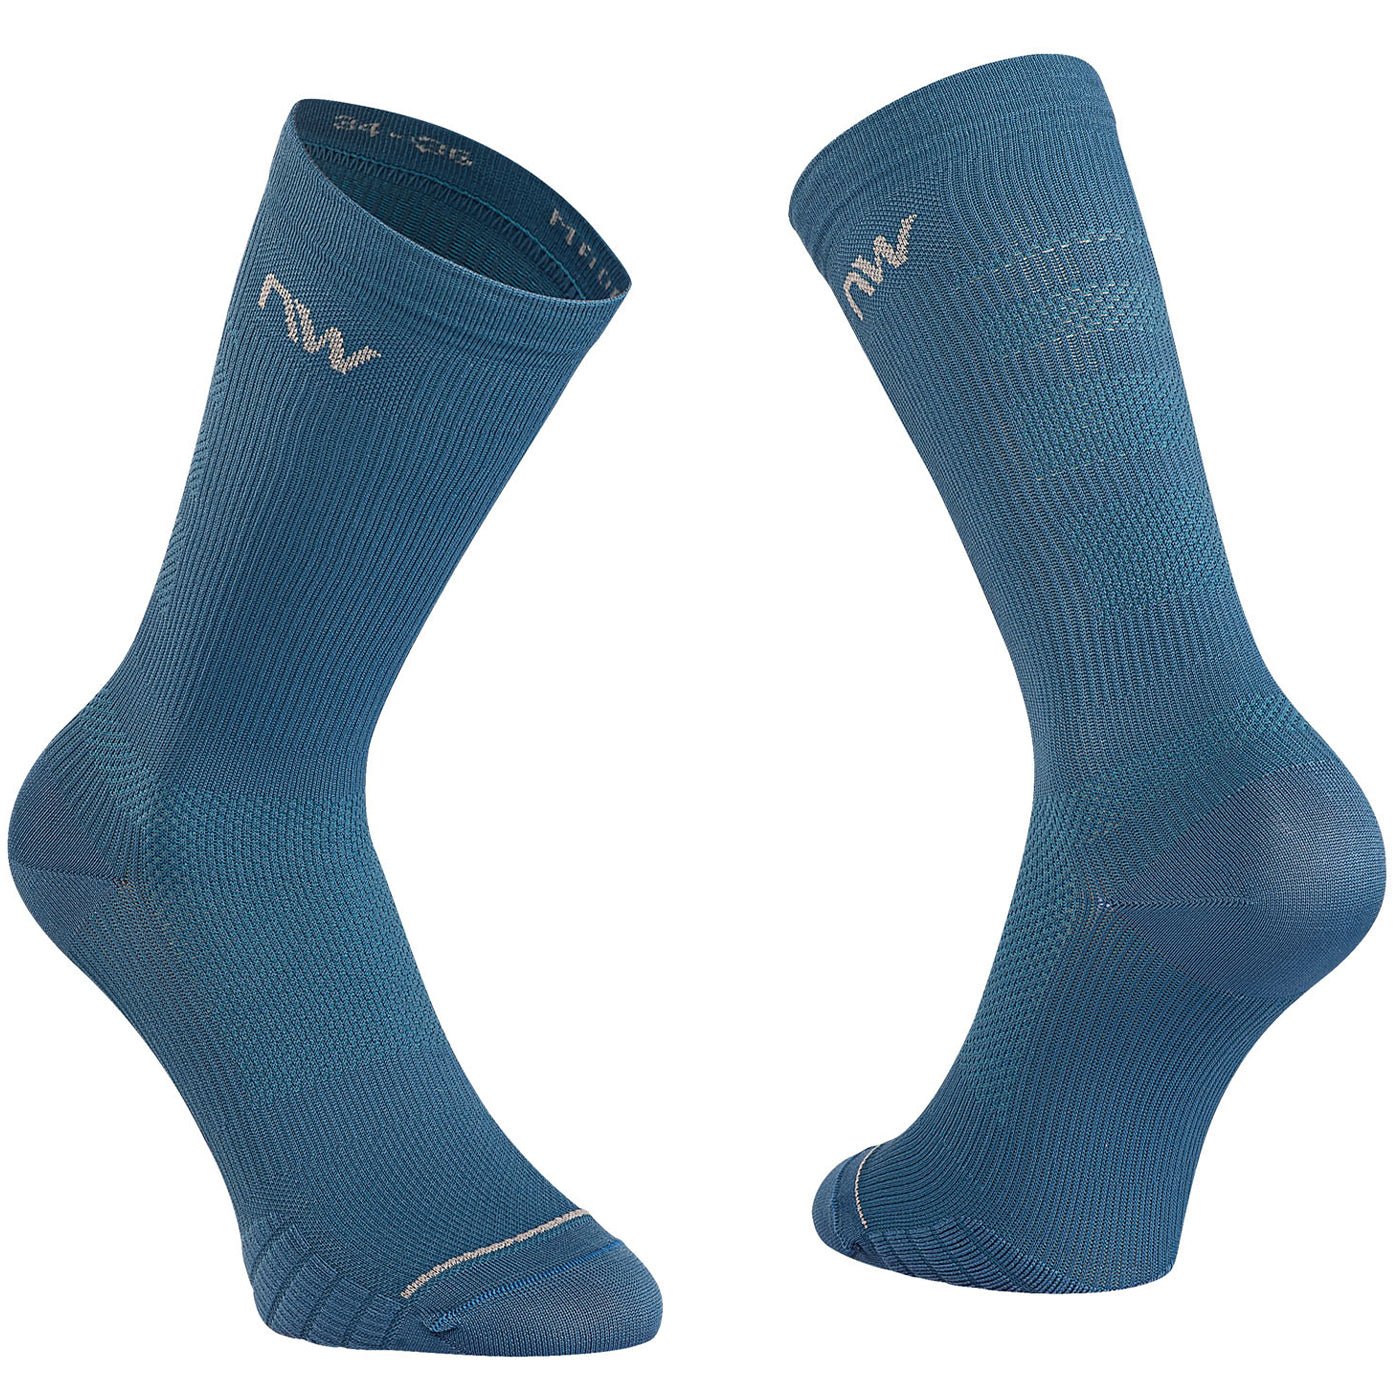 Northwave Extreme Pro socks - Blue | All4cycling